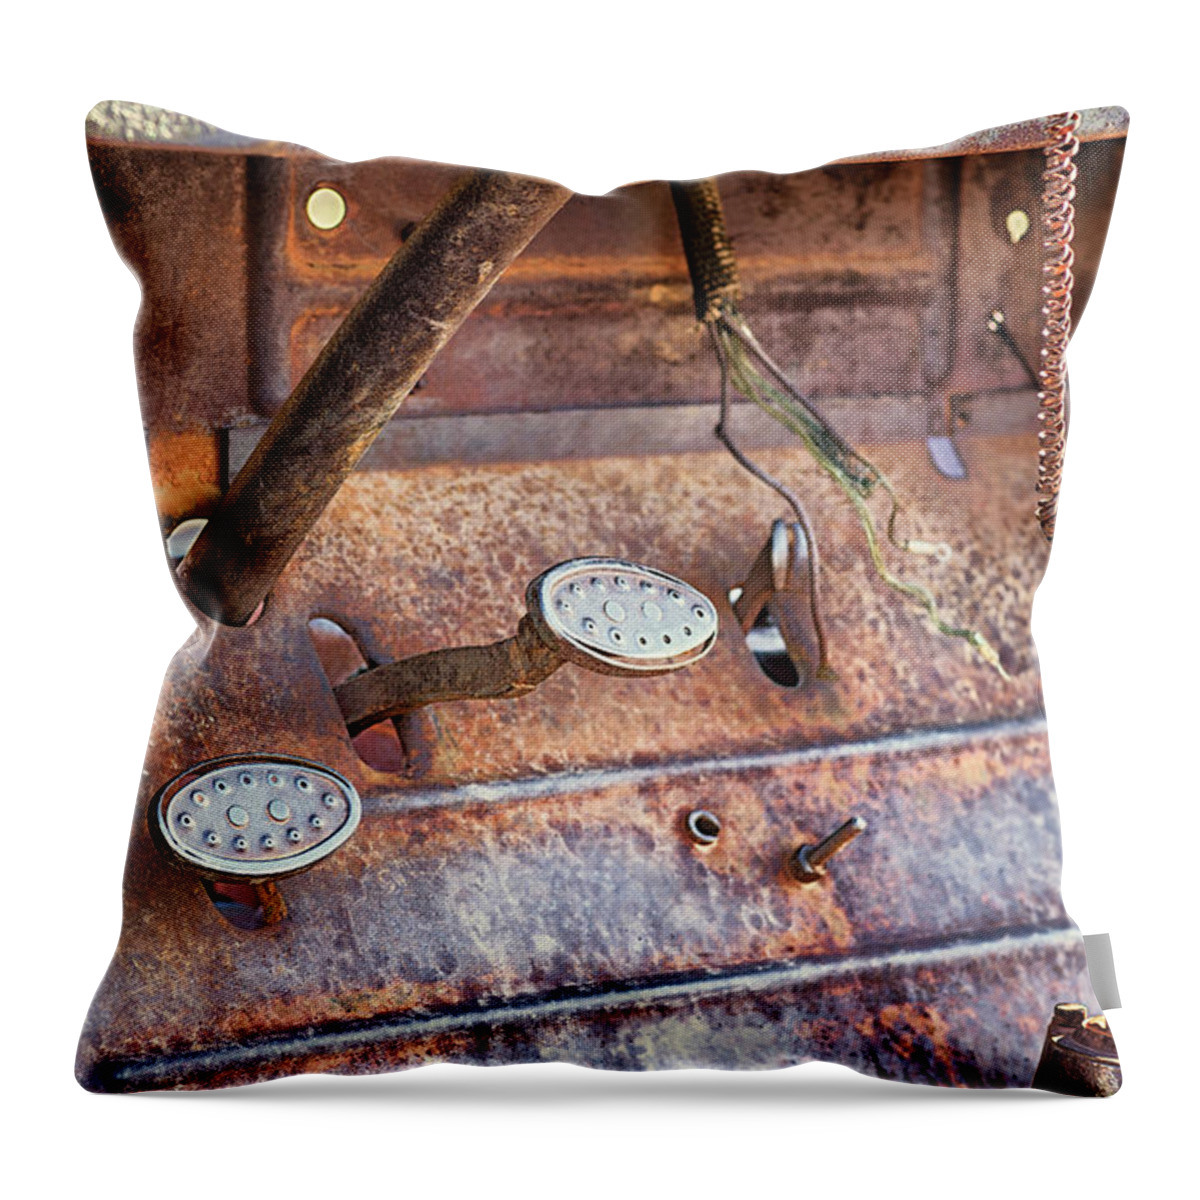 Car Throw Pillow featuring the photograph No Foot On The Pedal by Joseph S Giacalone